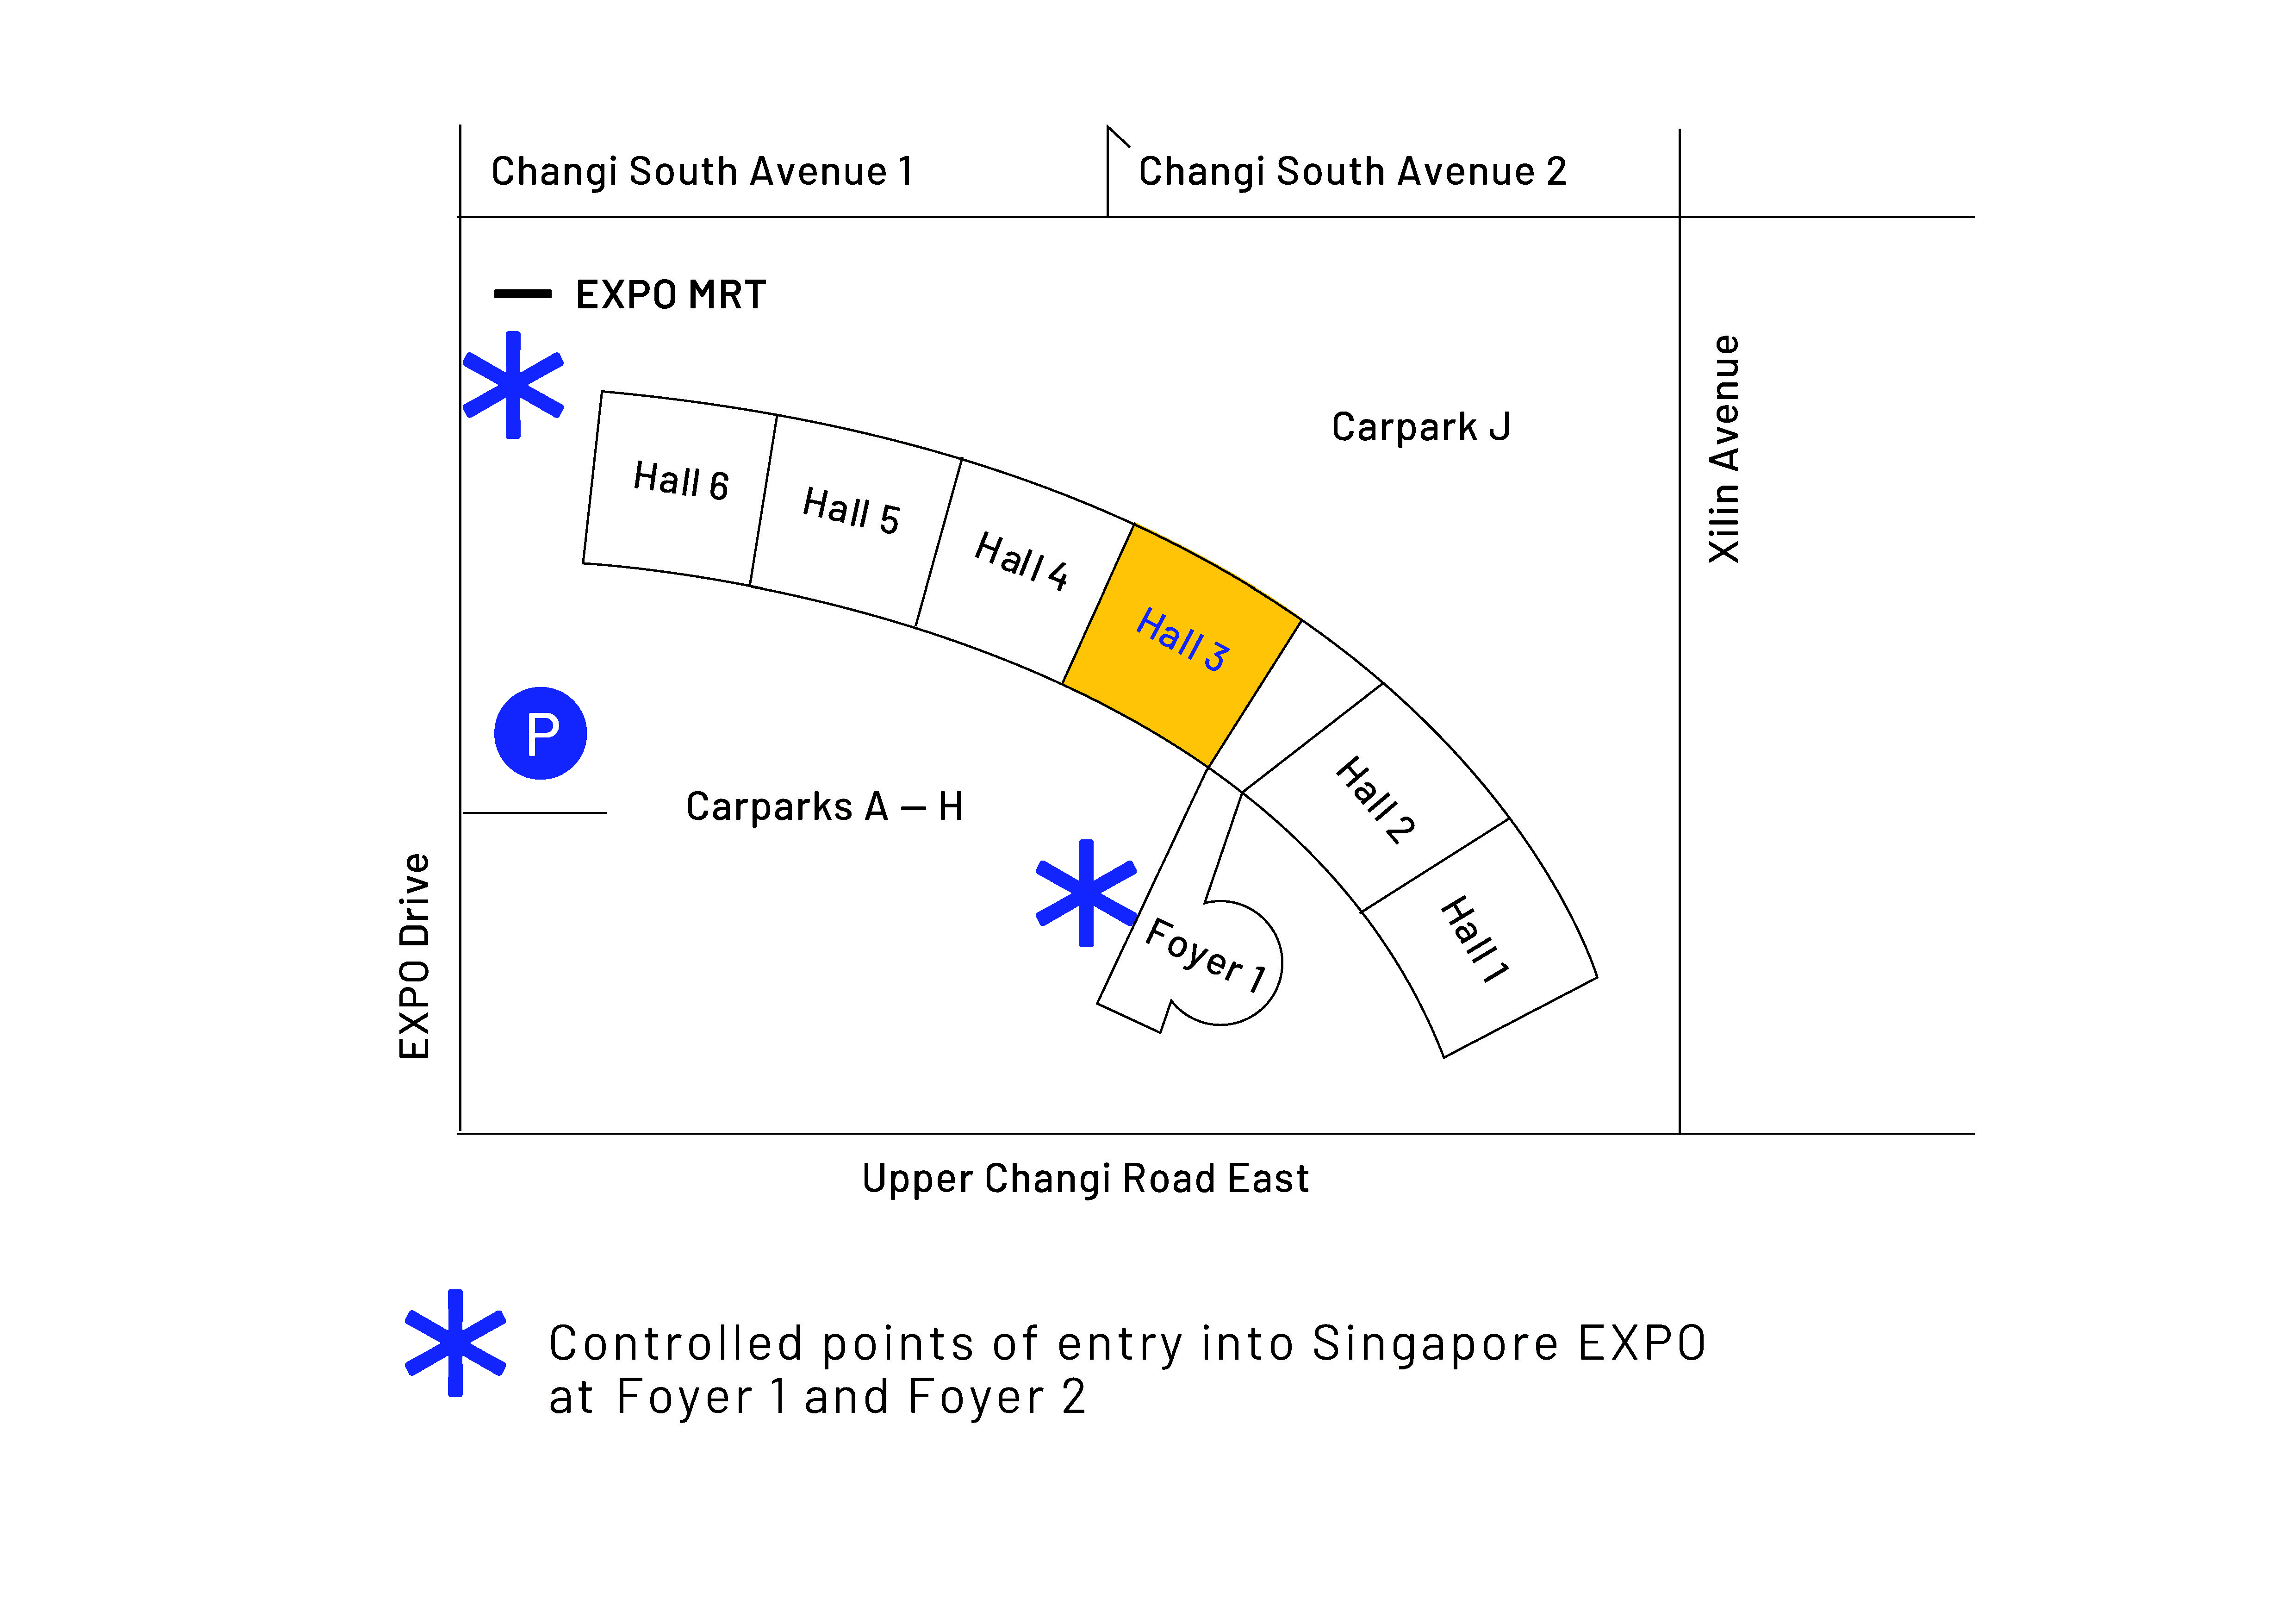 Singapore Expo entry points